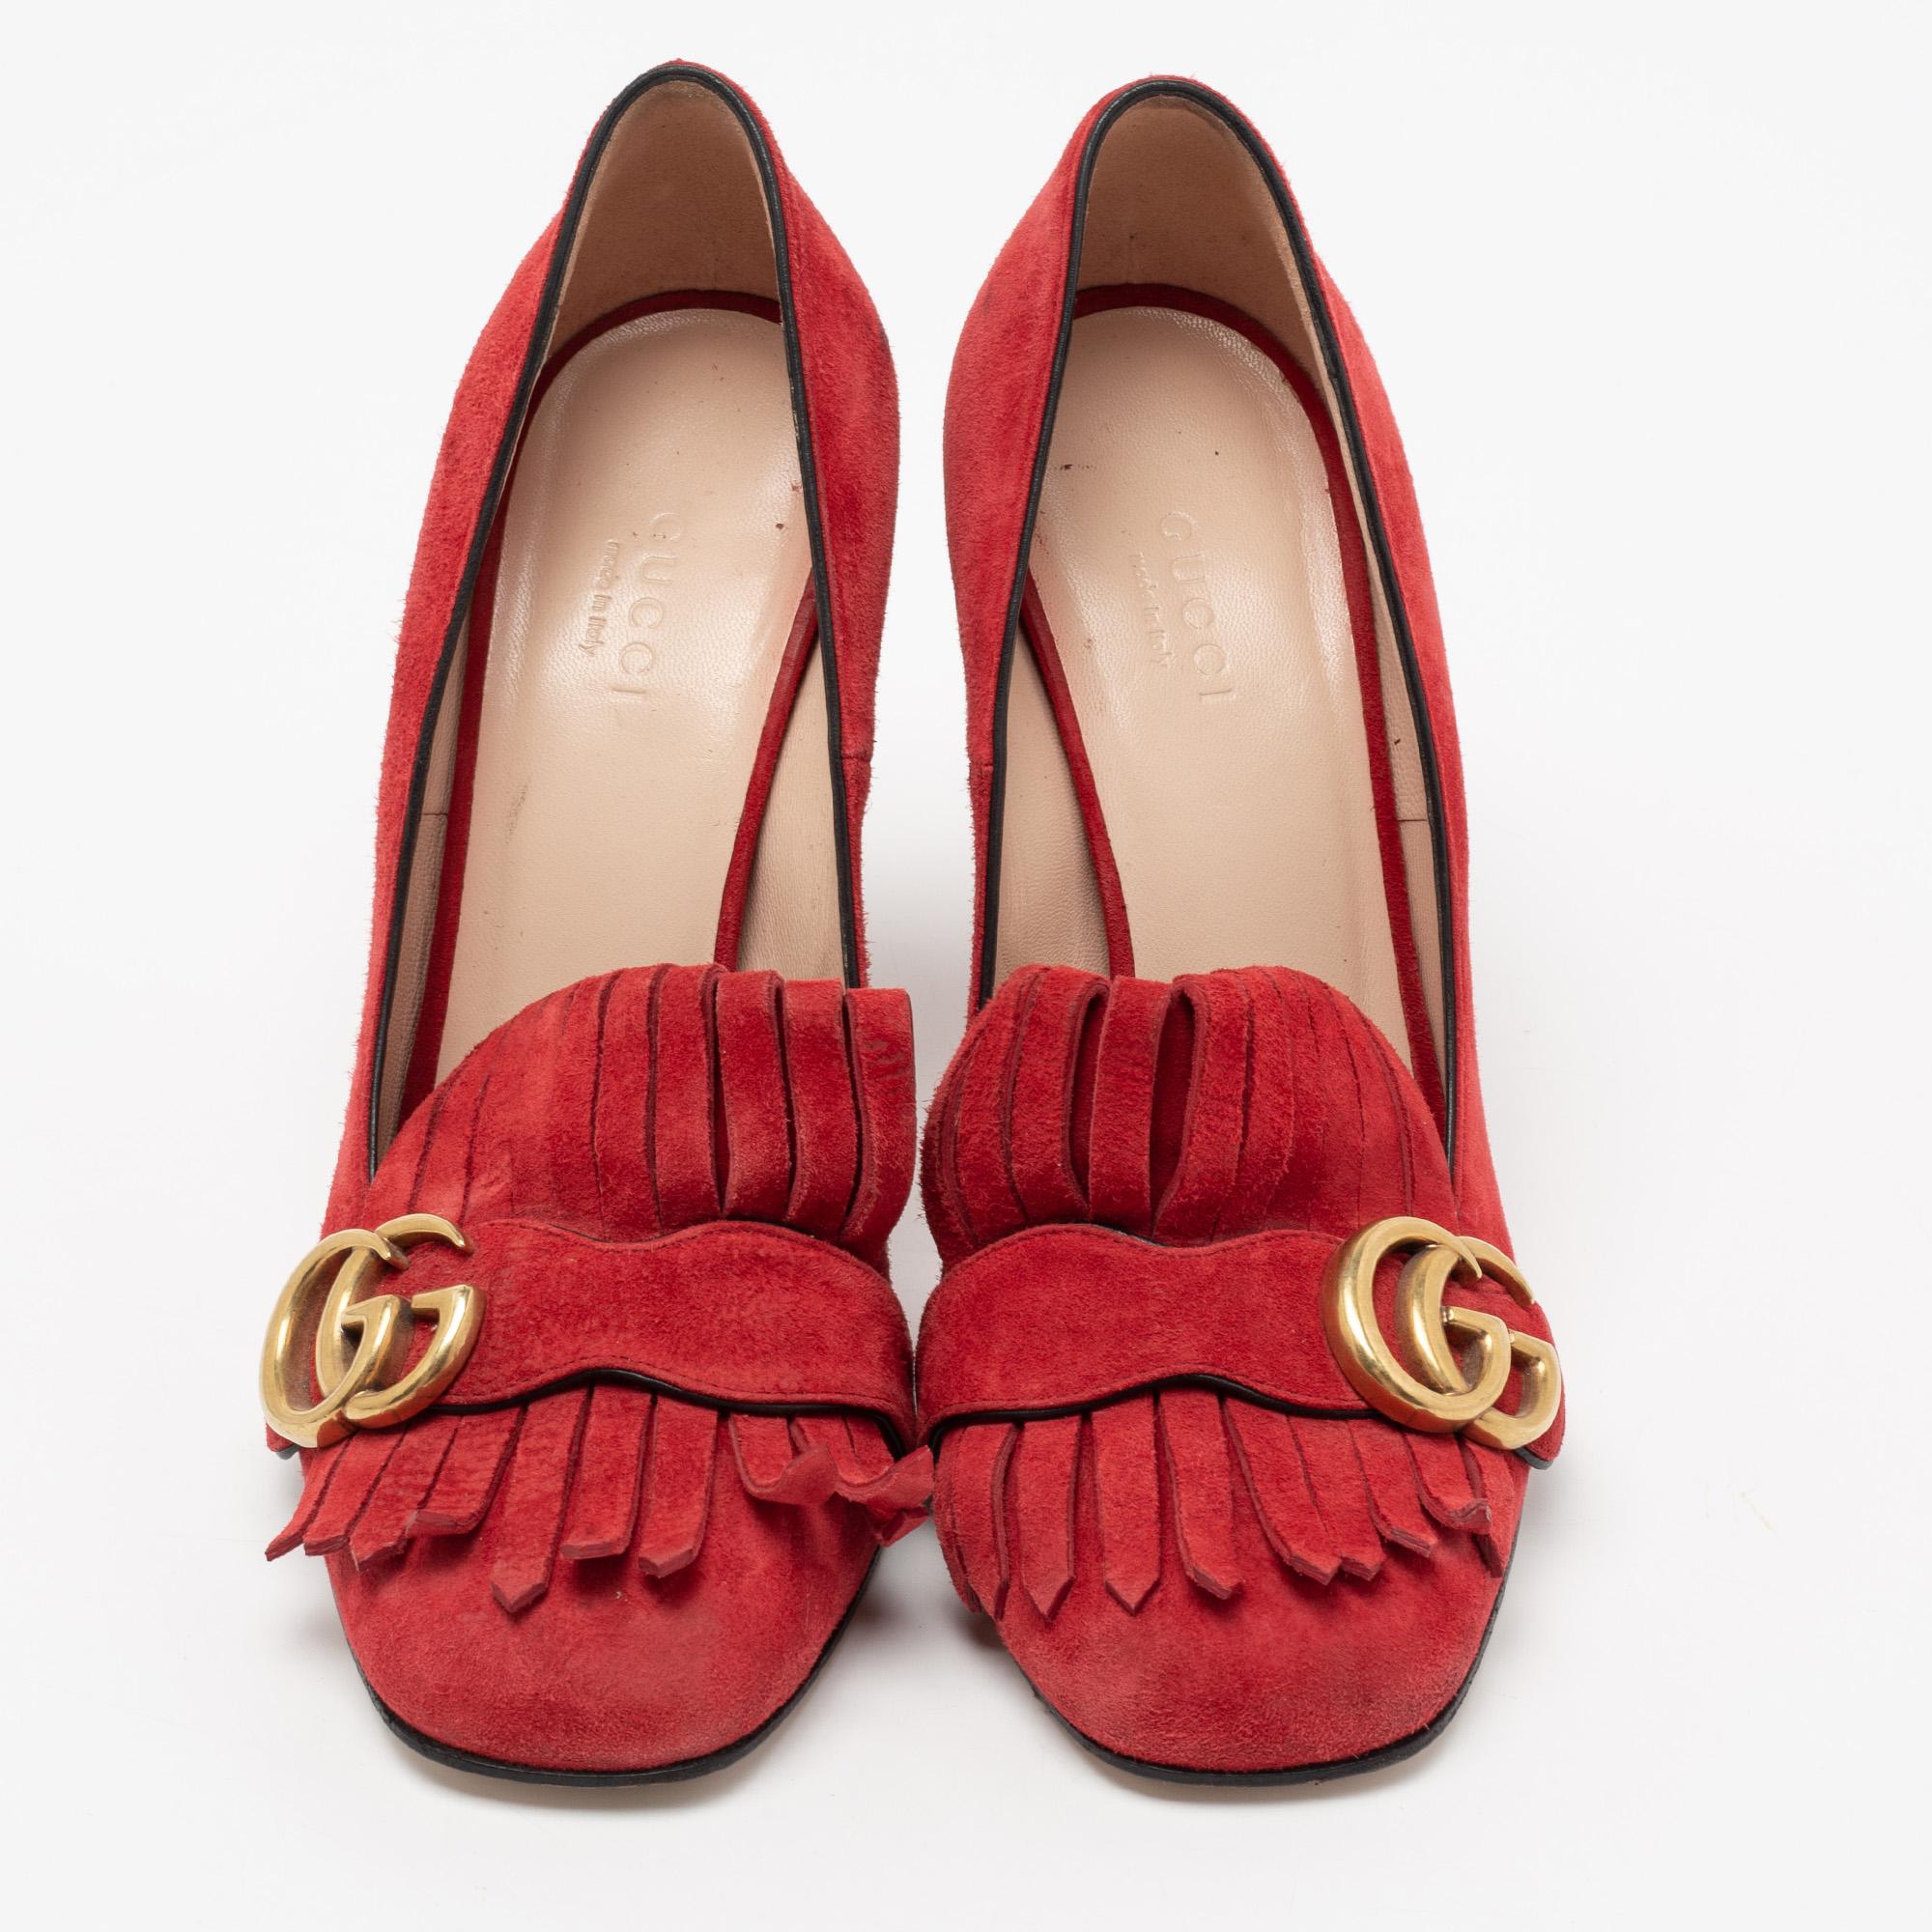 Glamourous and easy to style, this pair of GG Marmont pumps by Gucci is a stunner. They've been crafted from red suede and styled with folded fringes with the brand's signature GG on the uppers. Square toes and a set of block heels complete the